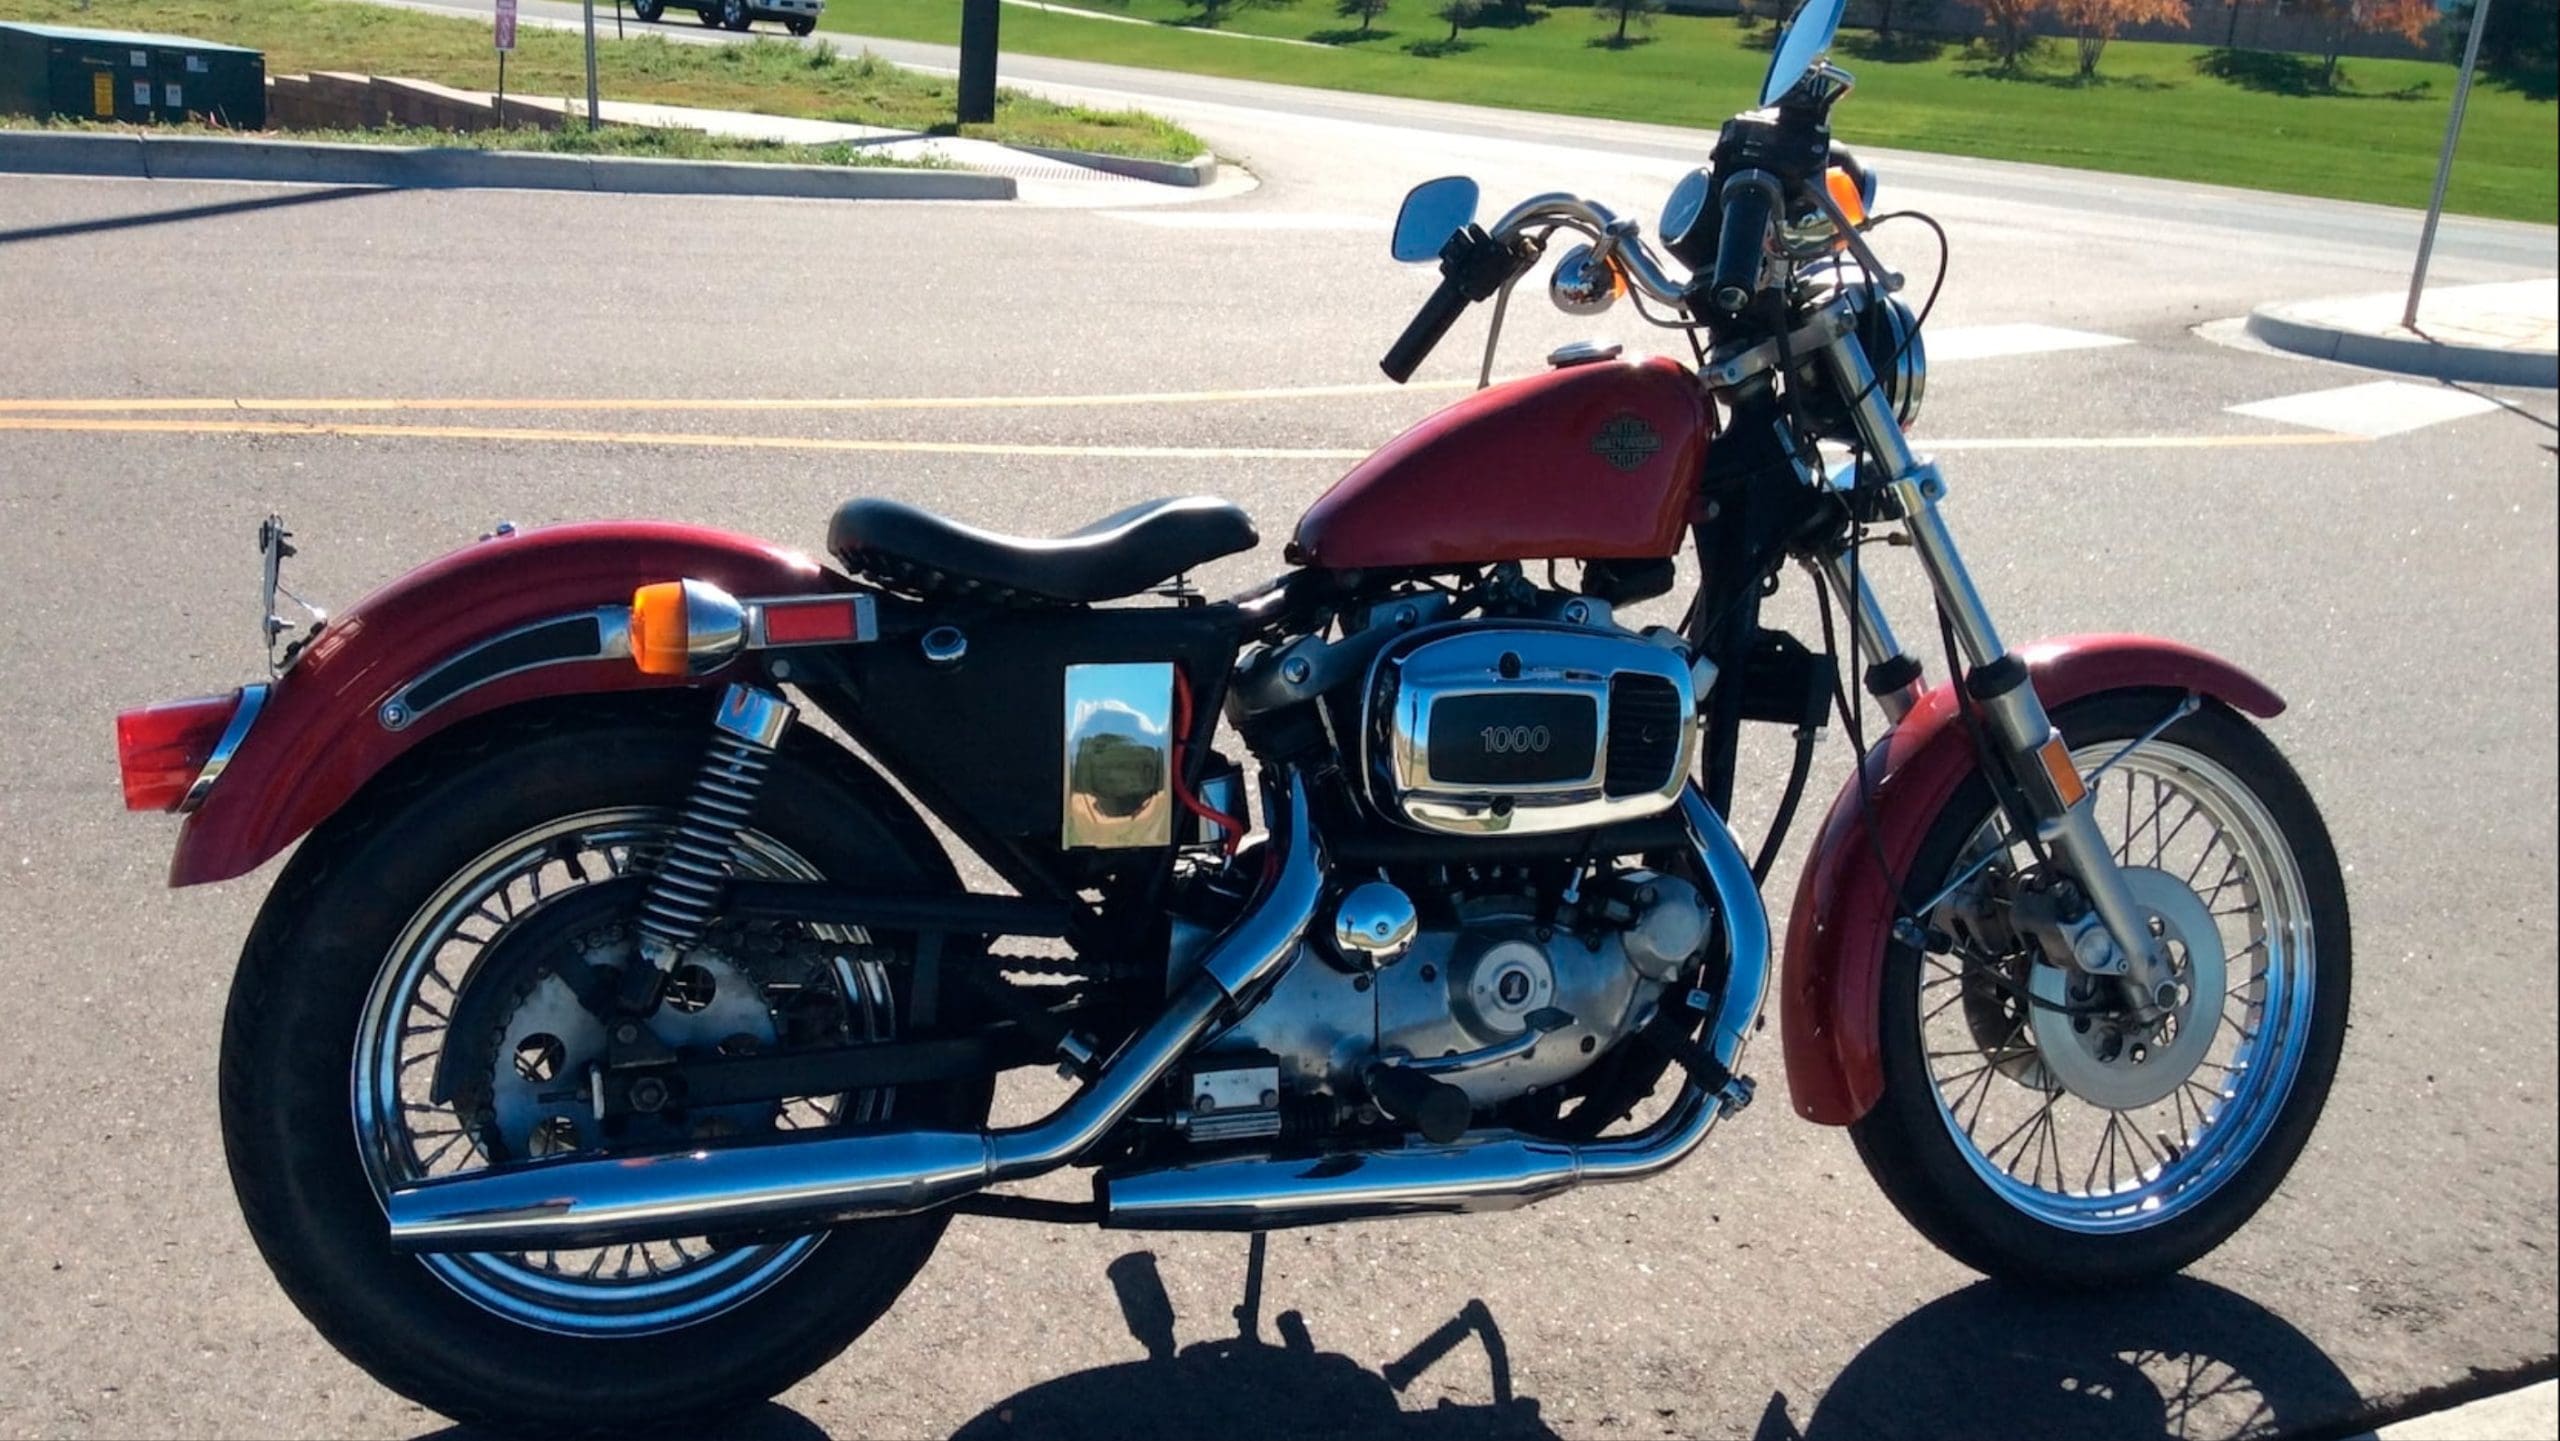 A 1980 Harley-Davidson Sportster motorcycle on a road